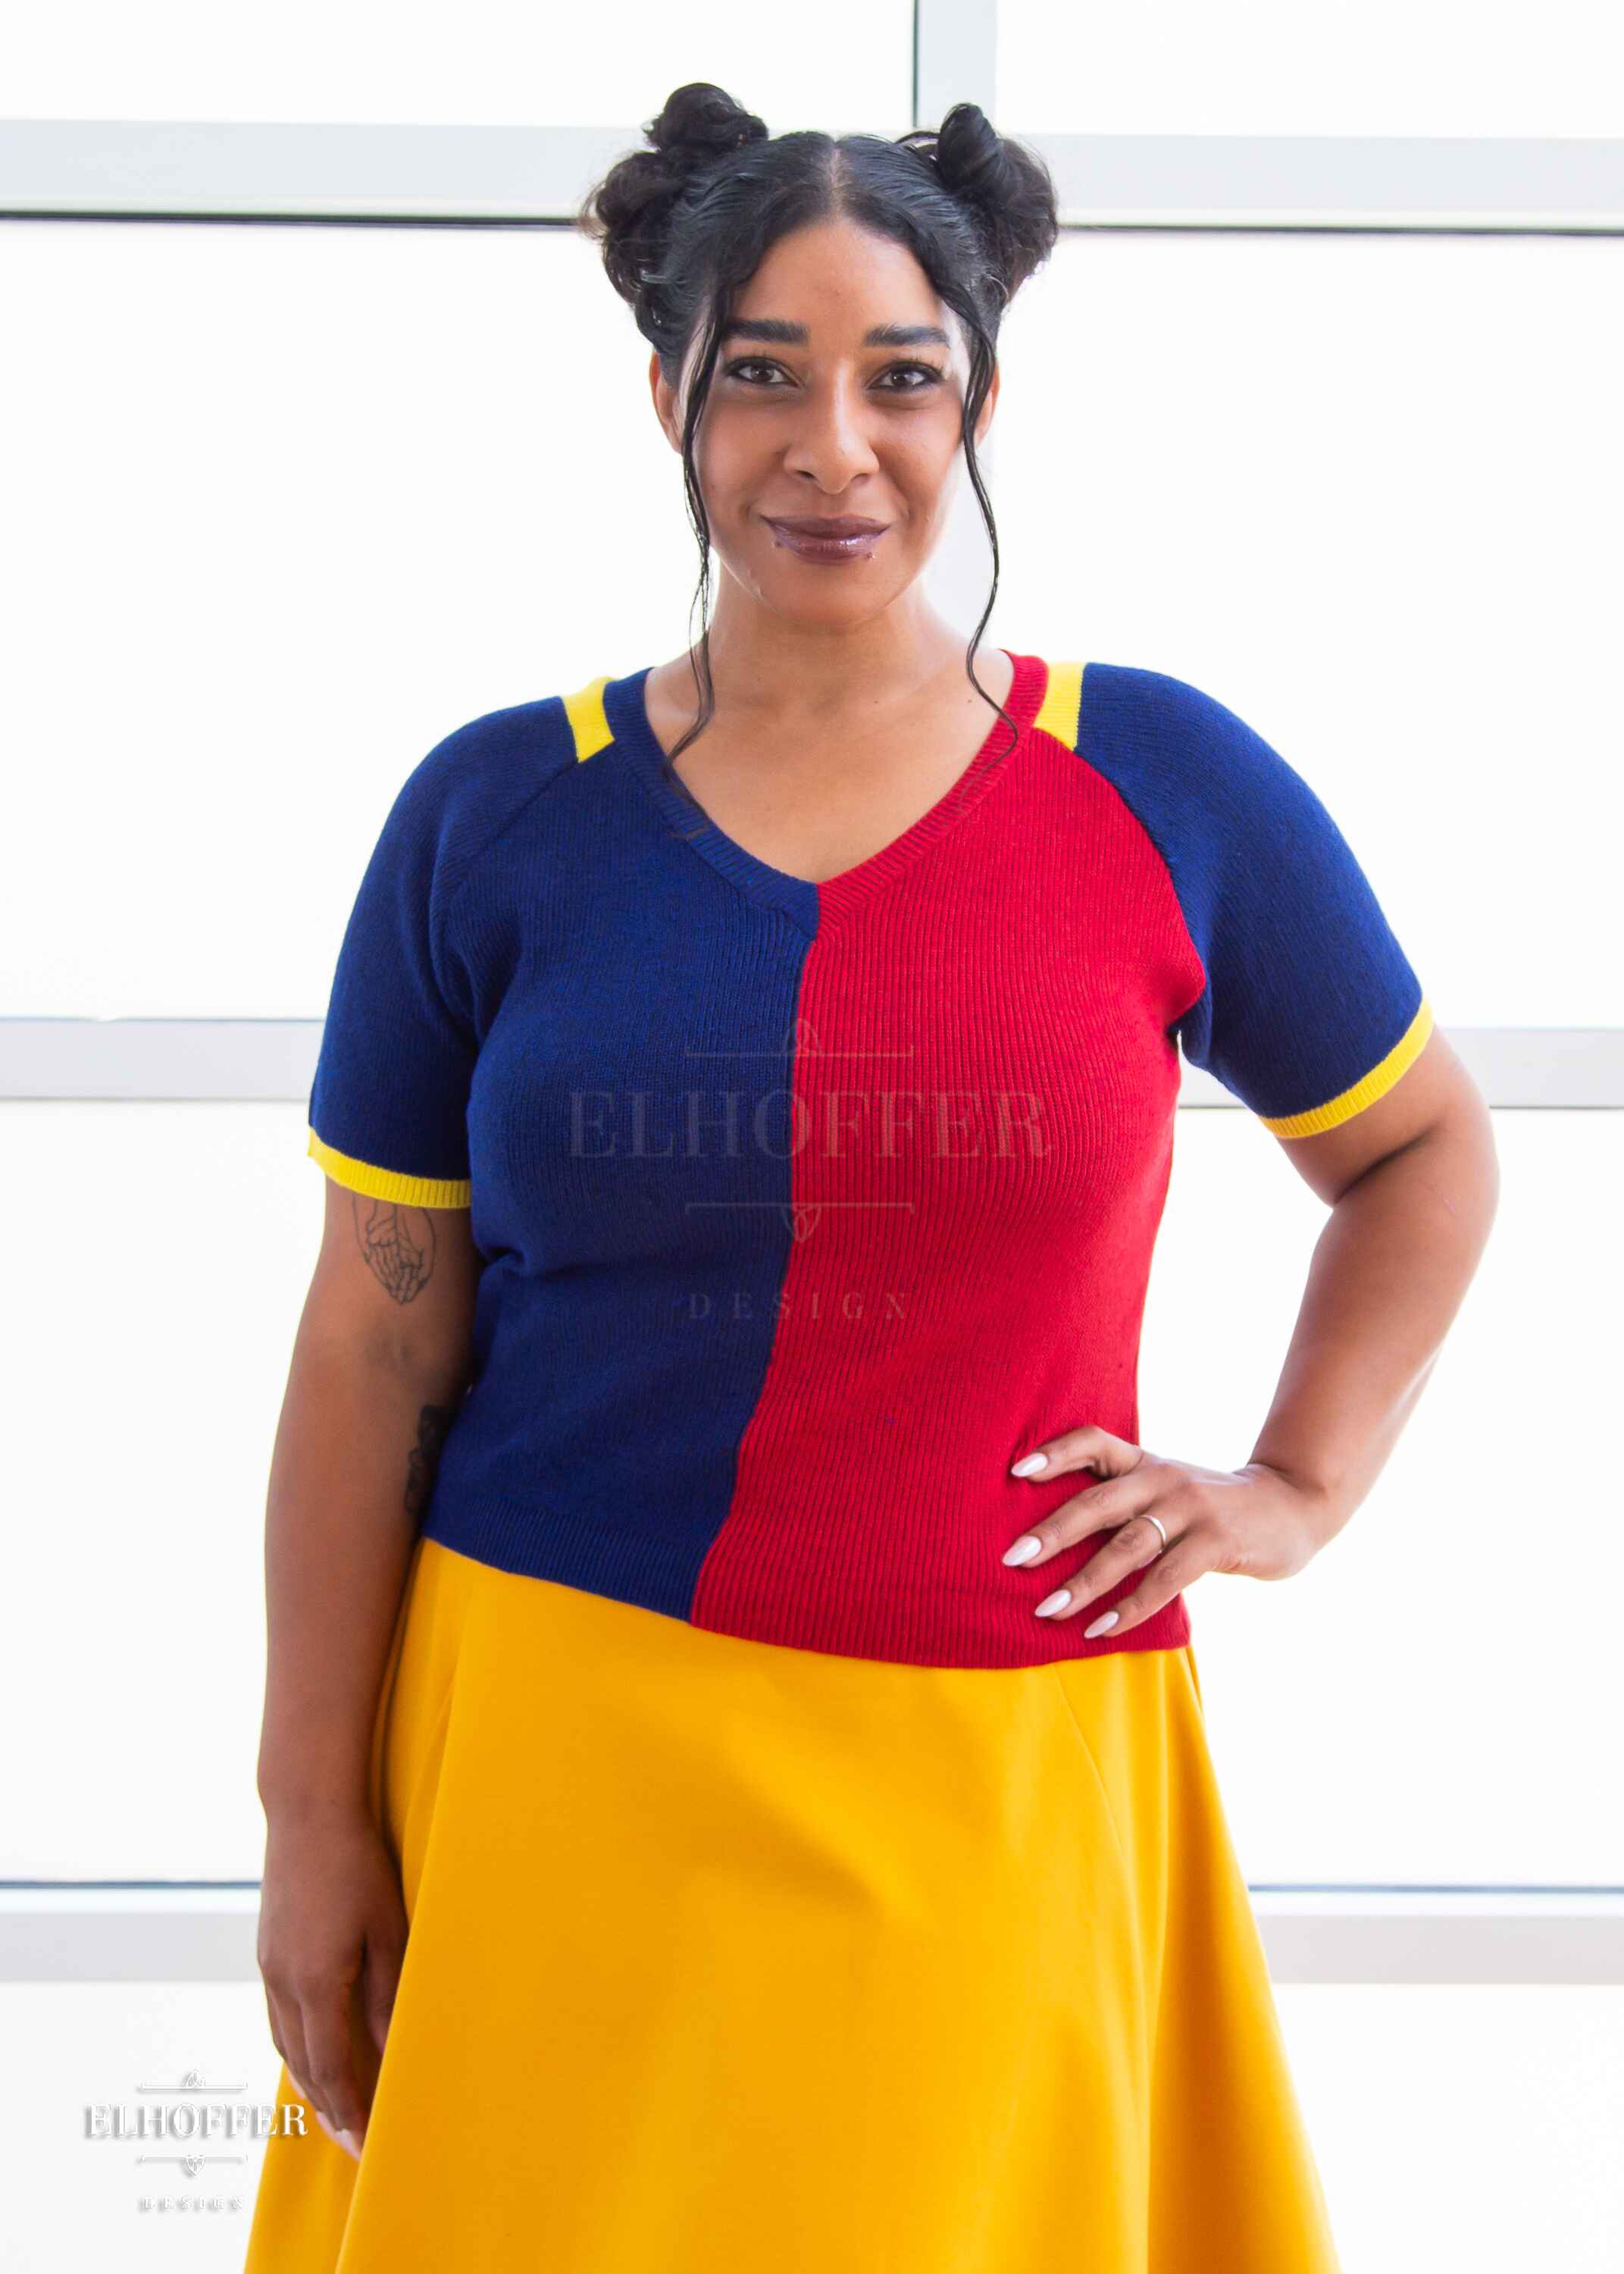 Janae, a light brown skinned L model with dark brown hair in space buns, is wearing a short sleeve knit top with alternating blue and red colors. There is yellow detailing along the top of the shoulder and around the cuff of the sleeve. She paired the knit top with a golden yellow knee length high low skirt.